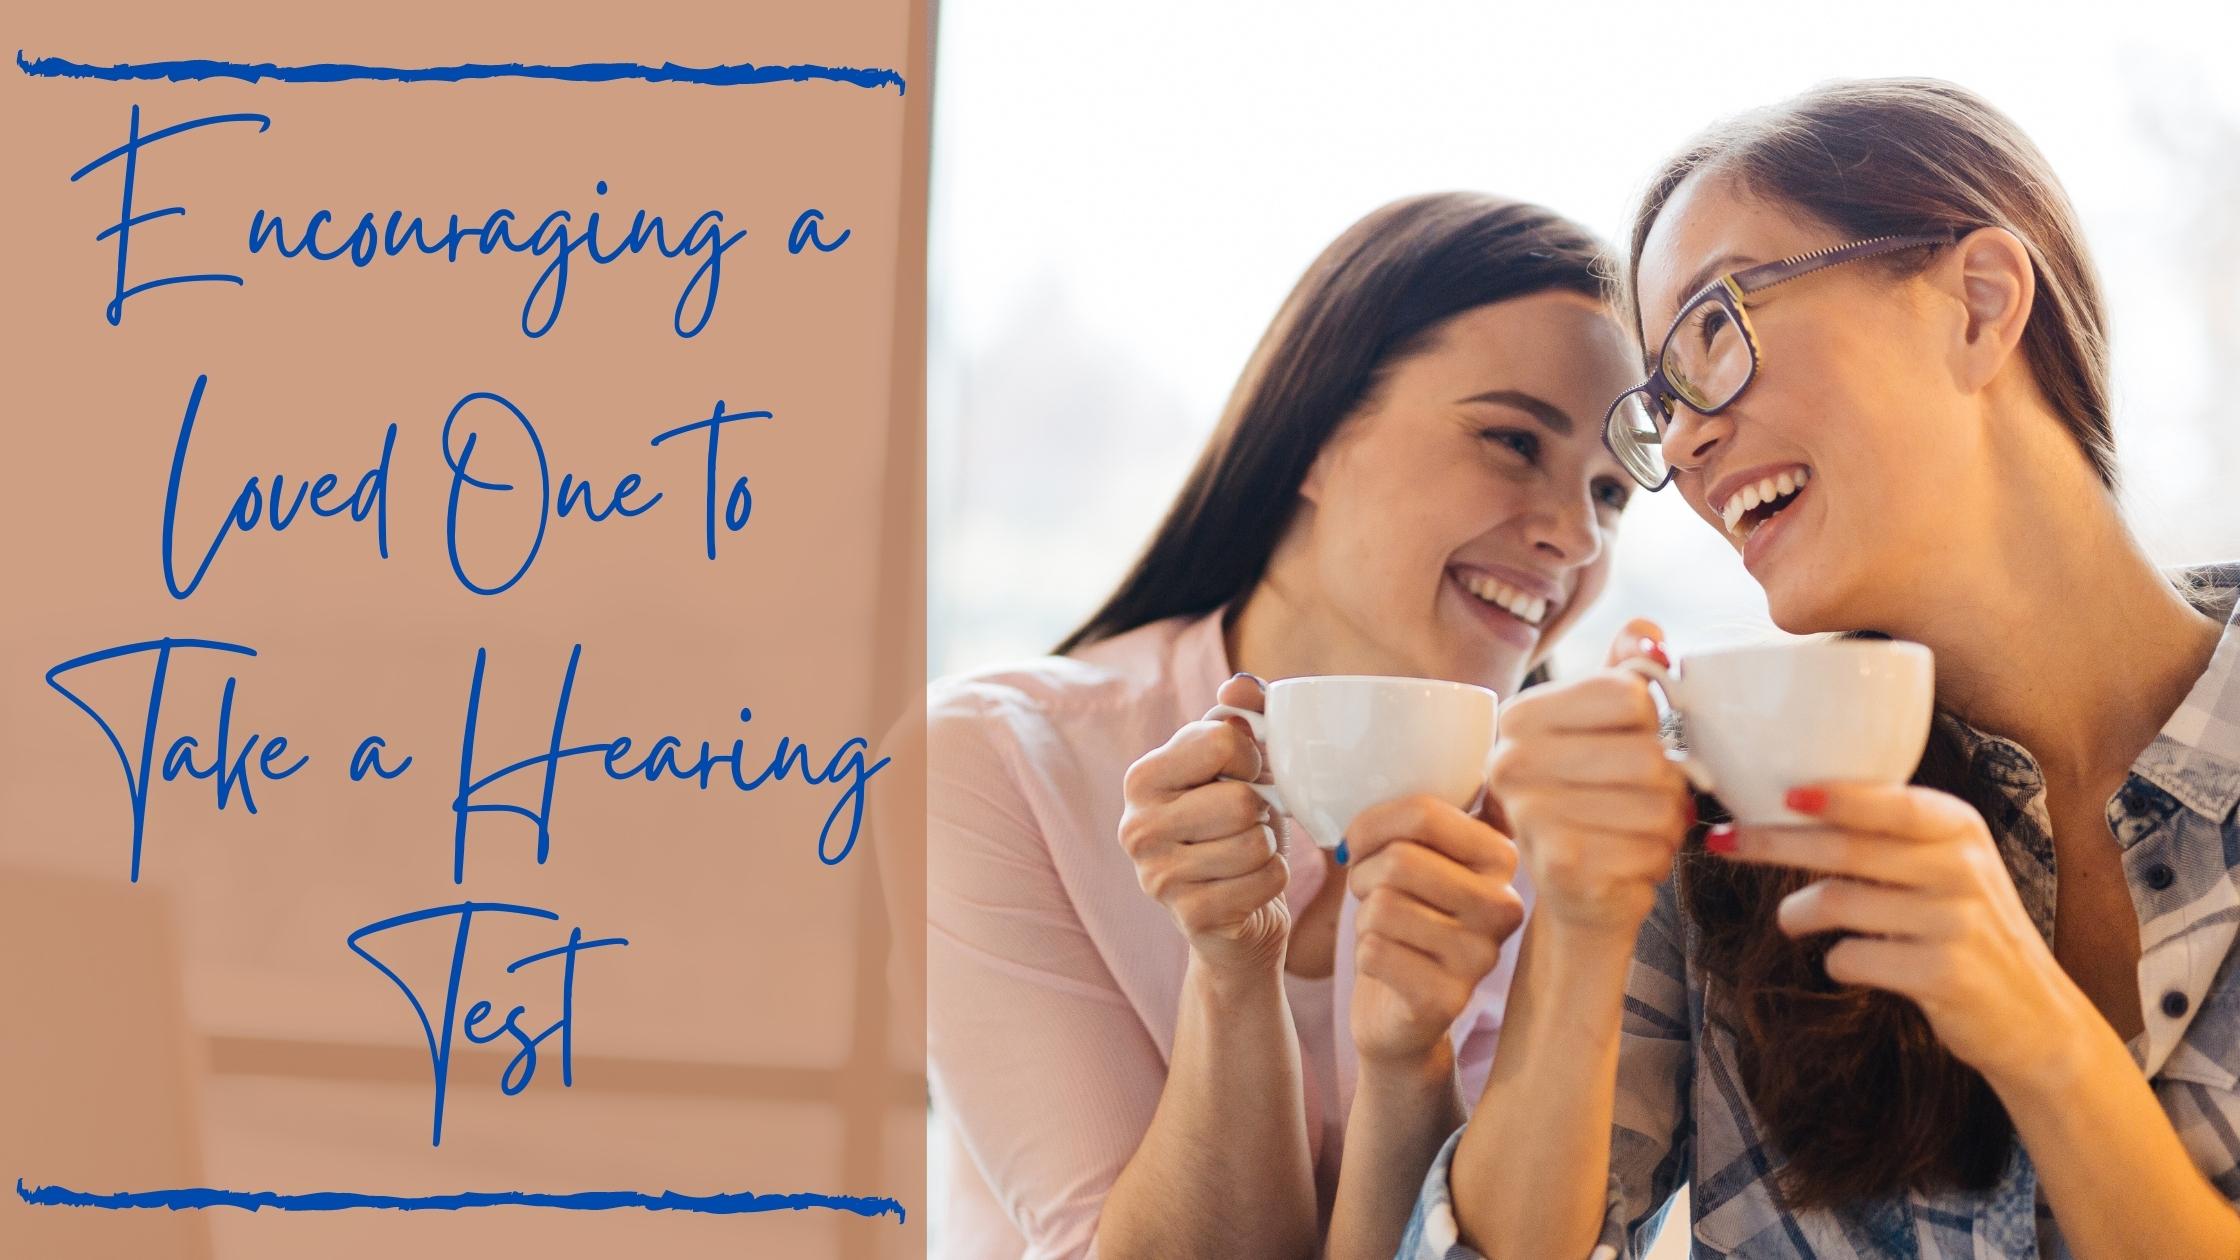 Encouraging a Loved One to Take a Hearing Test